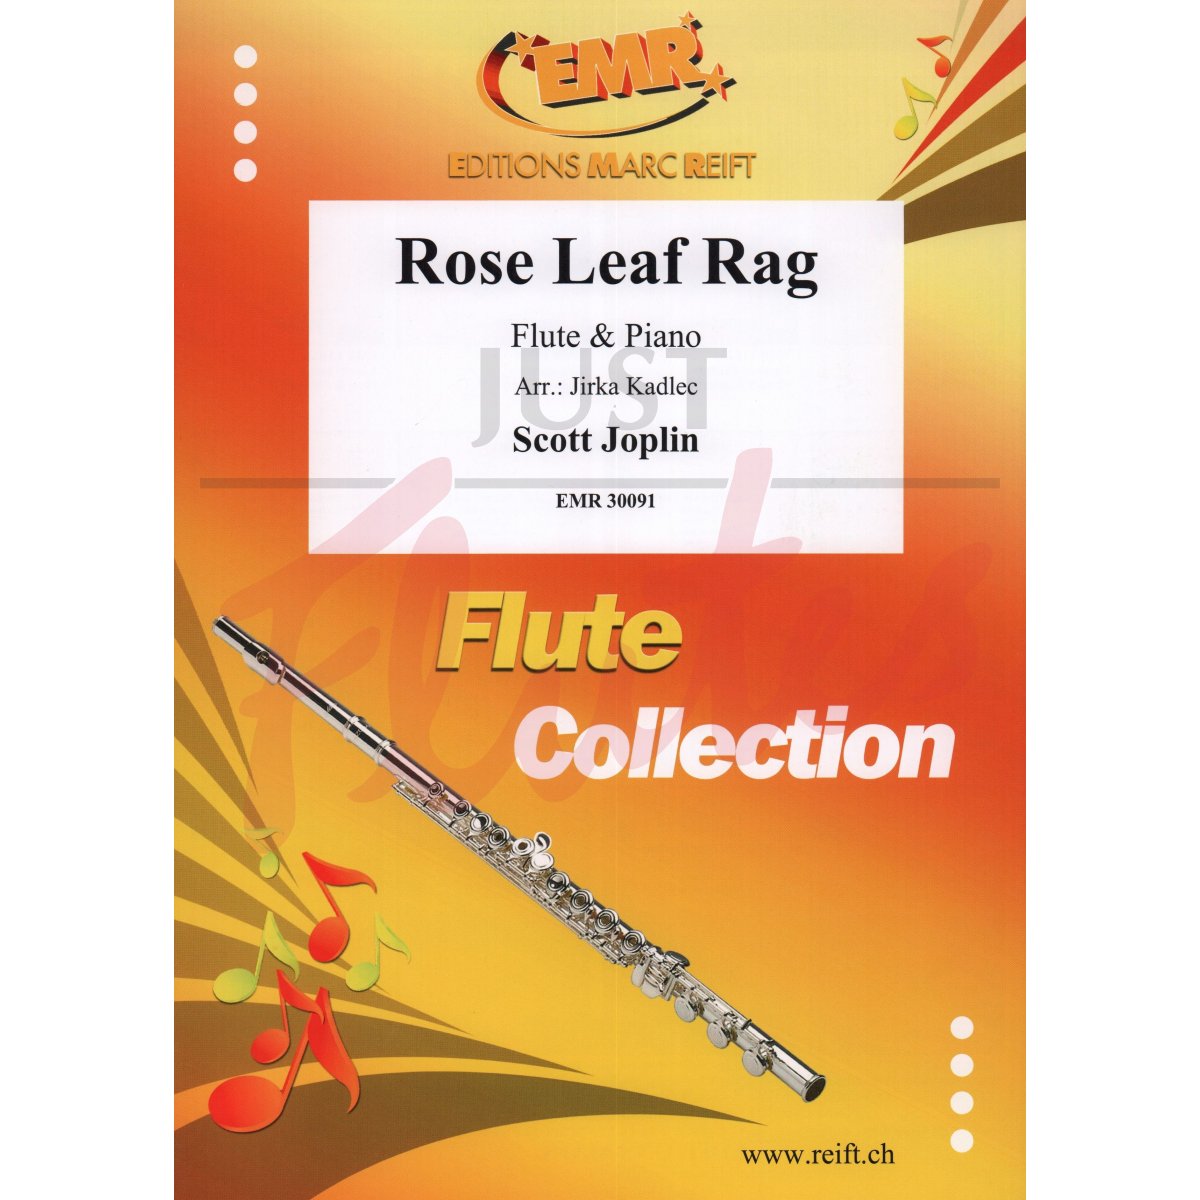 Rose Leaf Rag for Flute and Piano